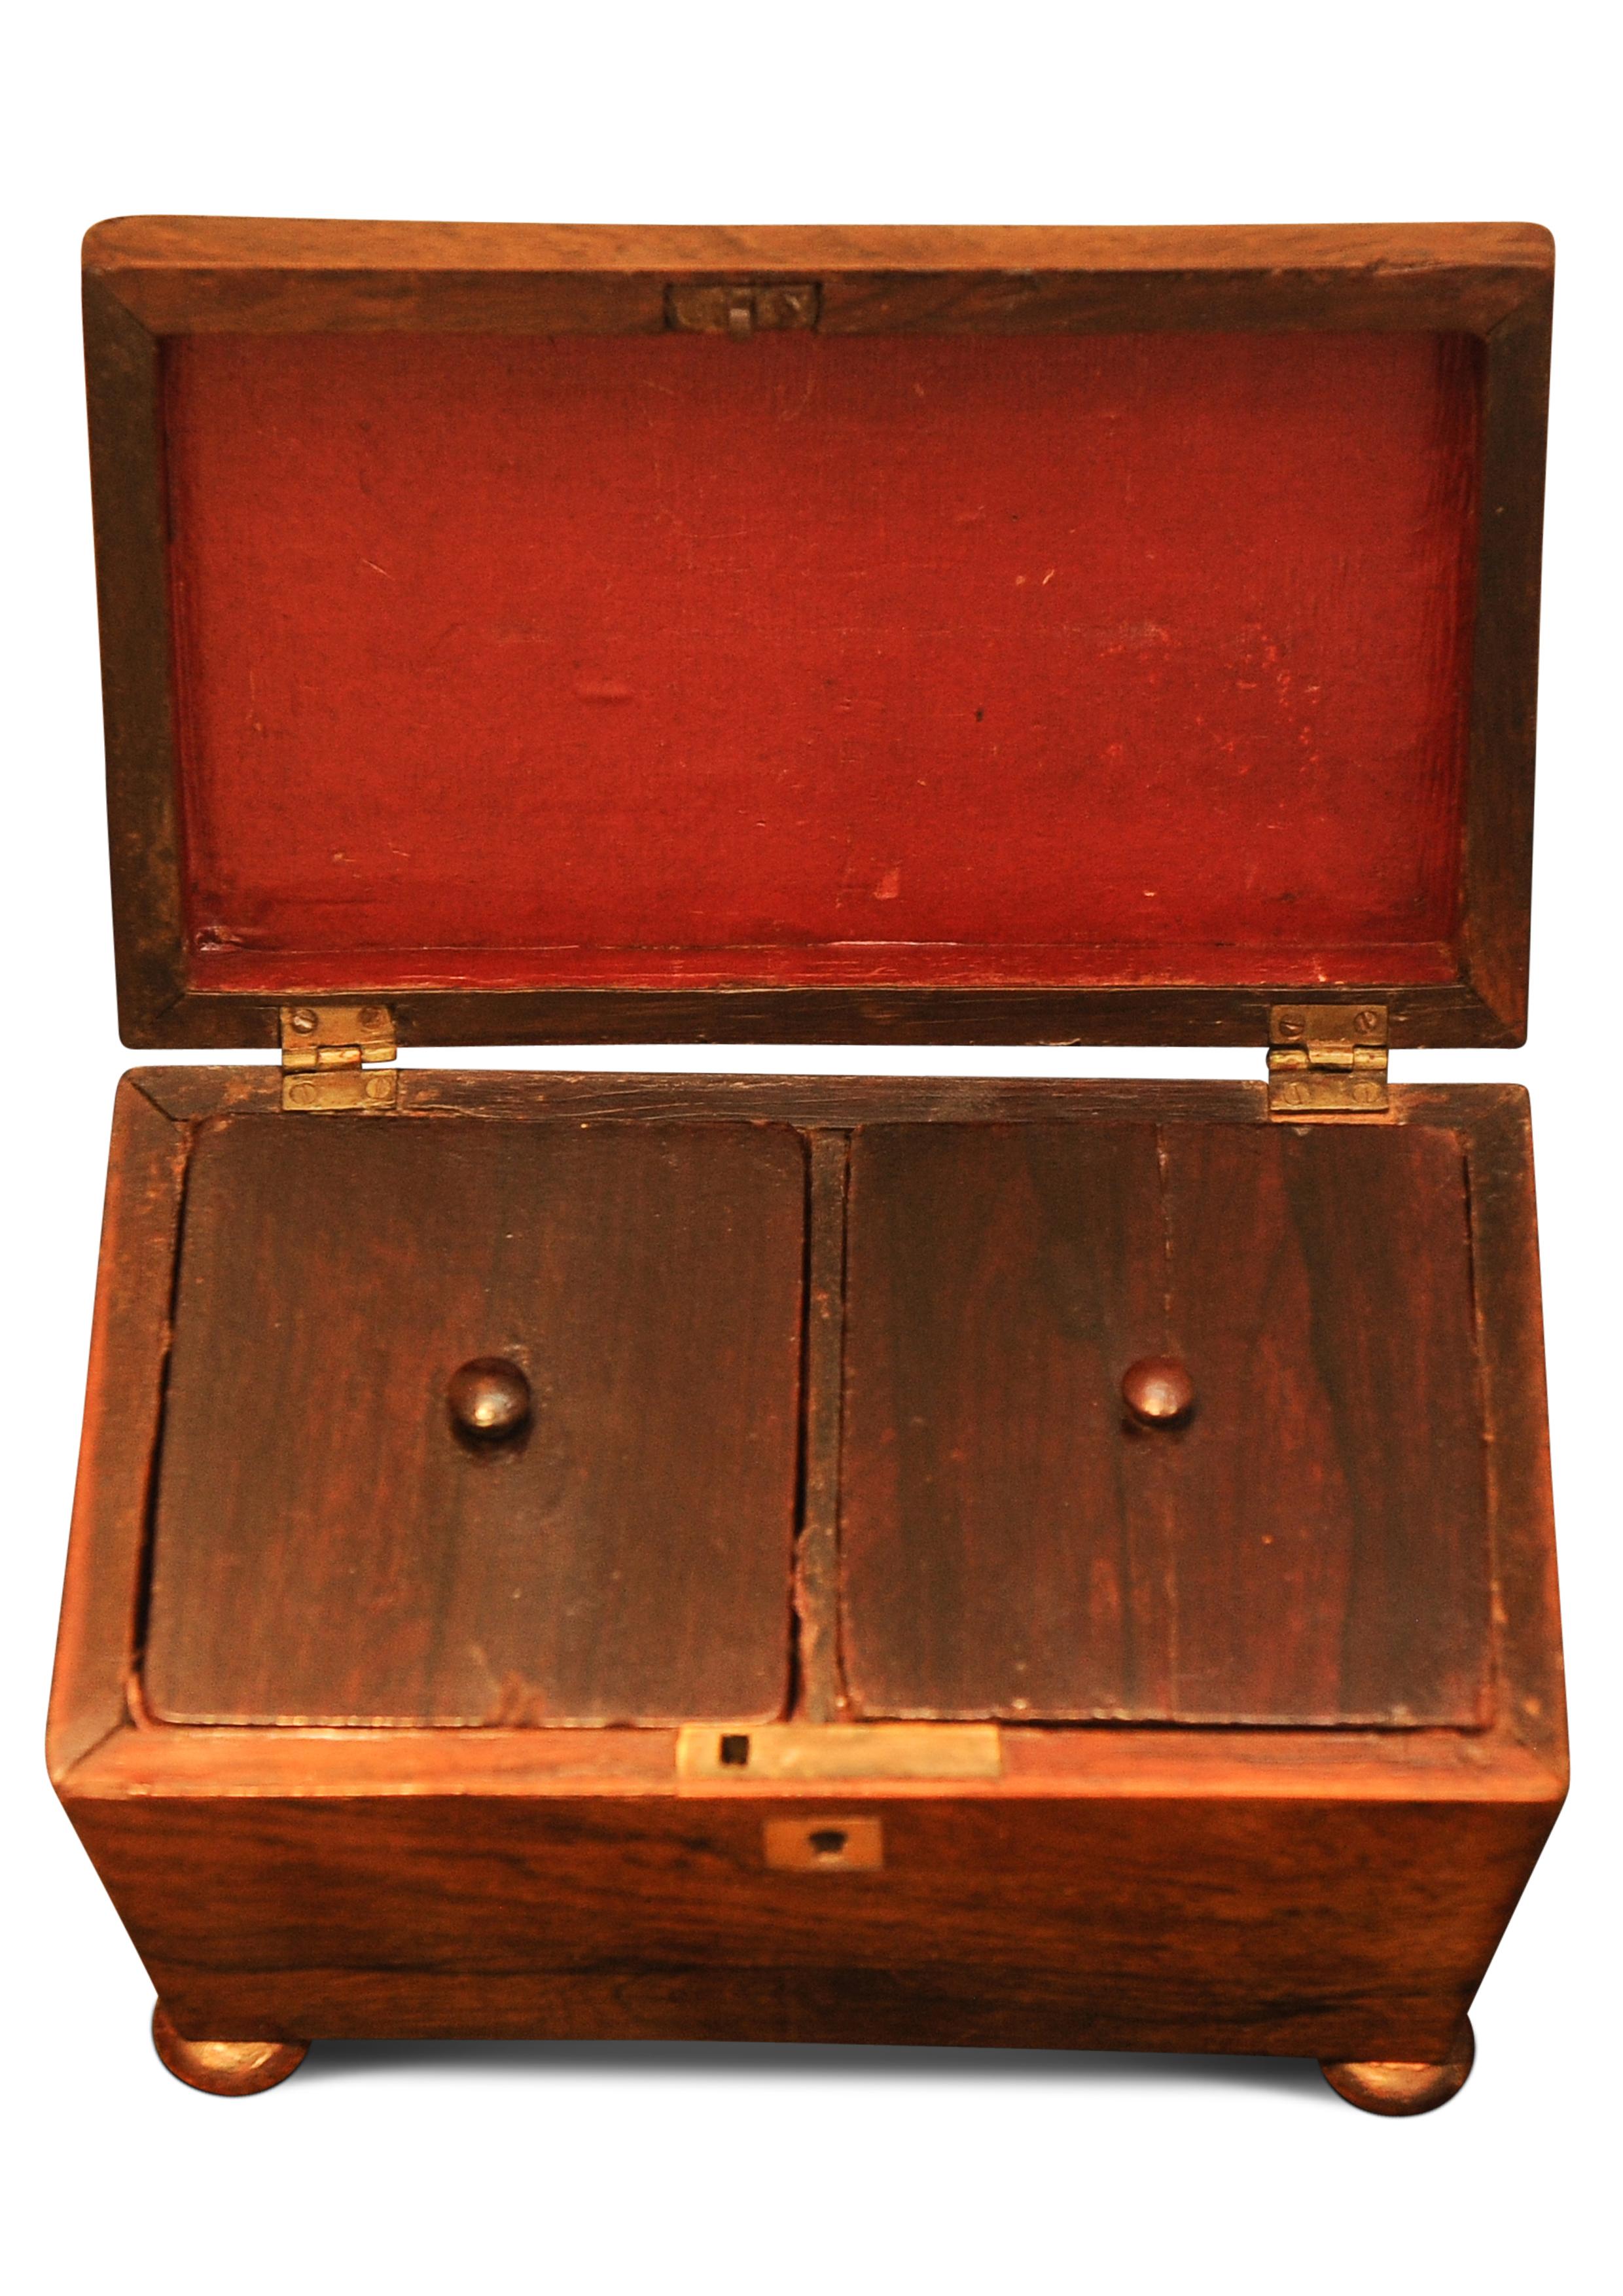 A Sarcophagus Shaped Regency Rosewood Tea Caddy With Separate Tea Compartments In Good Condition For Sale In High Wycombe, GB